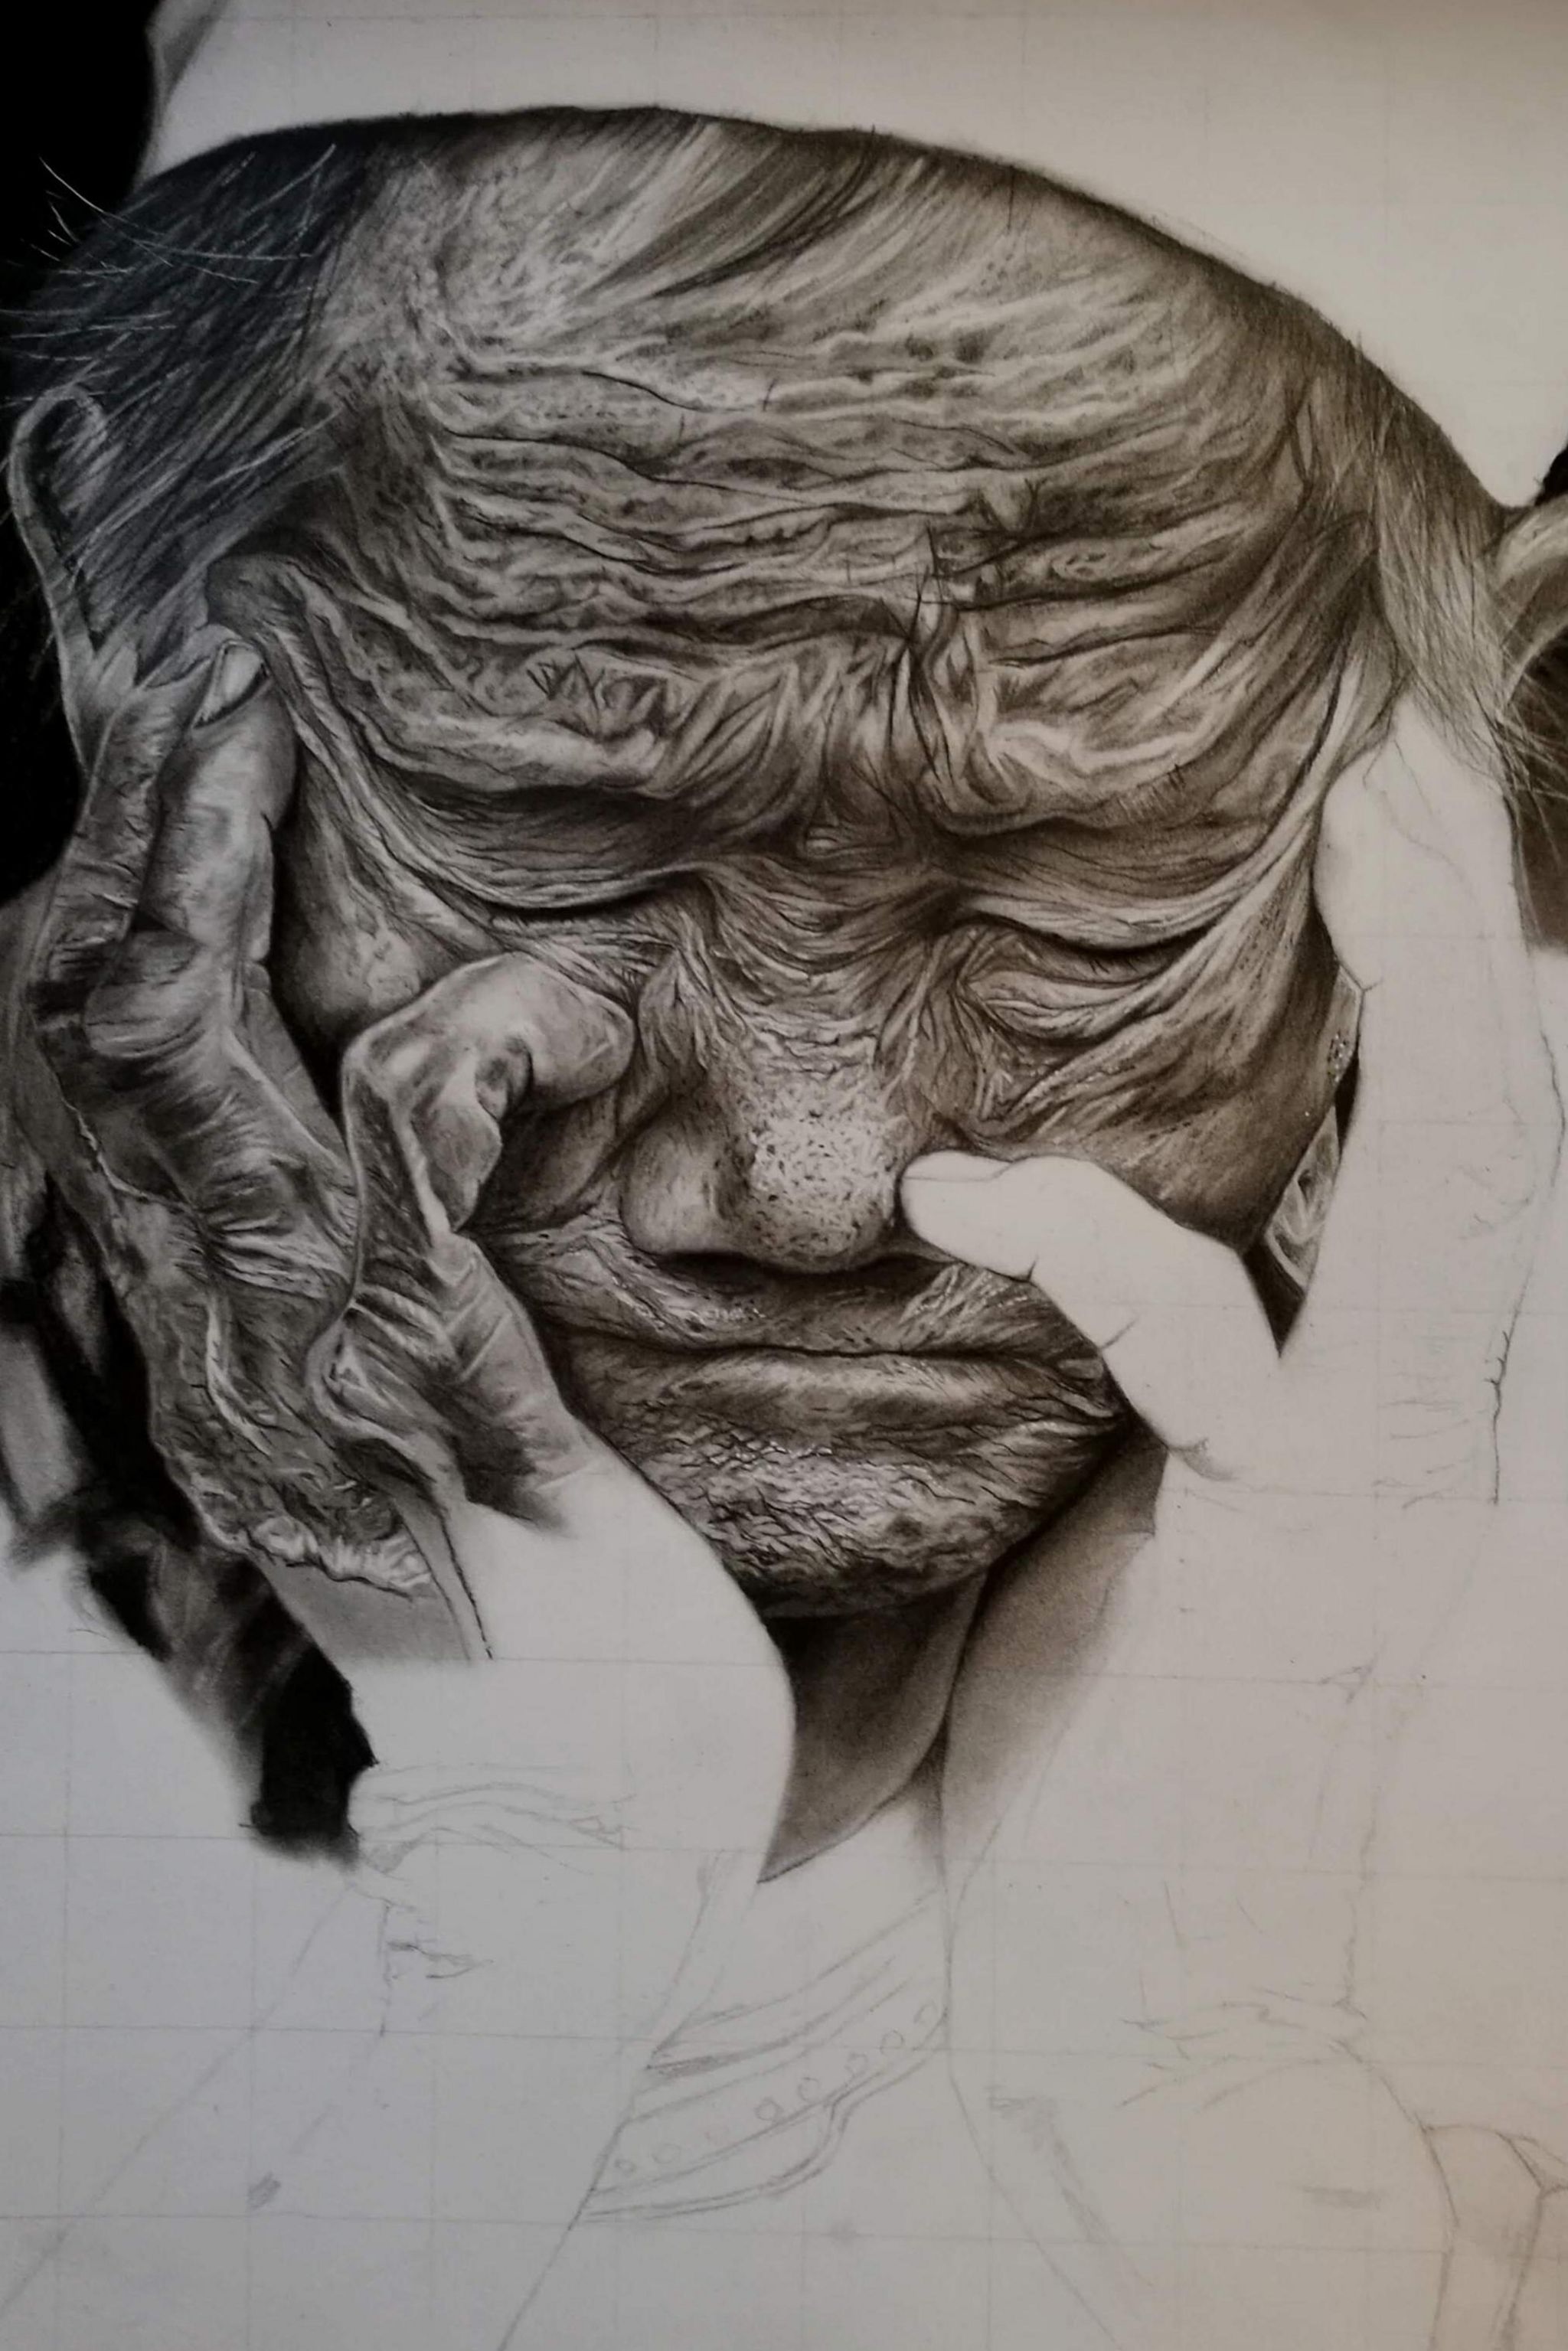 A photorealistic drawing of an older person